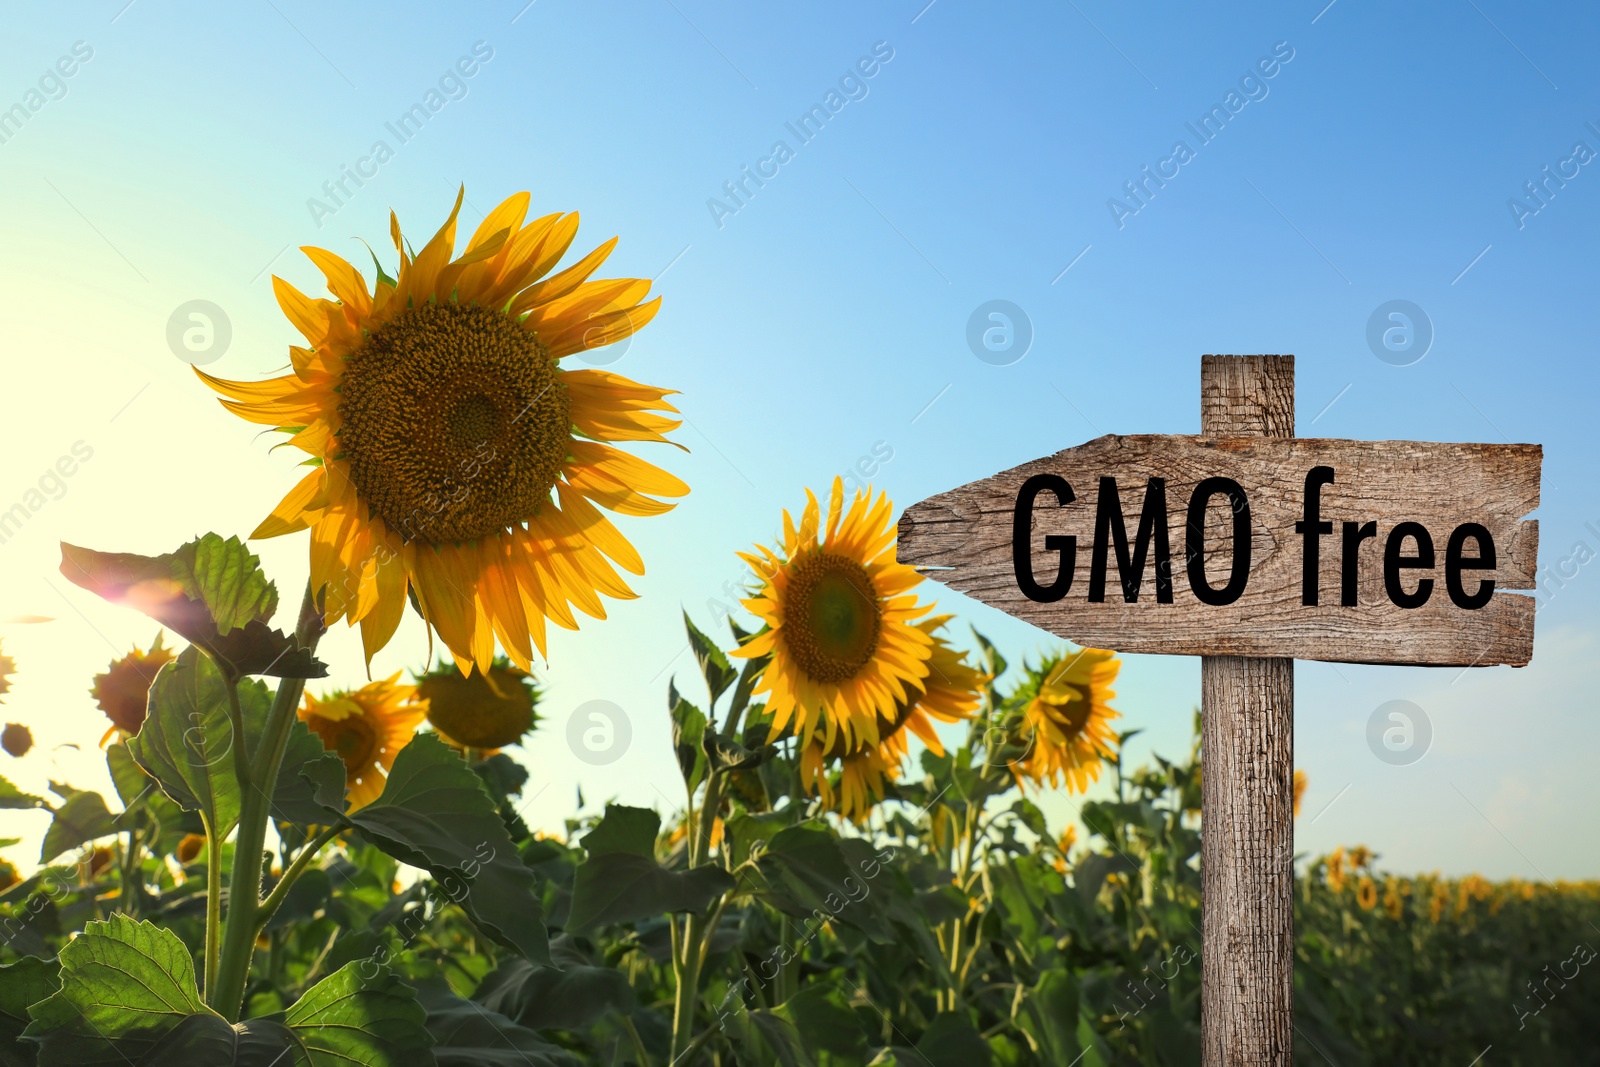 Image of Concept of GMO free harvest. Wooden sign and sunflowers growing in field on sunny day